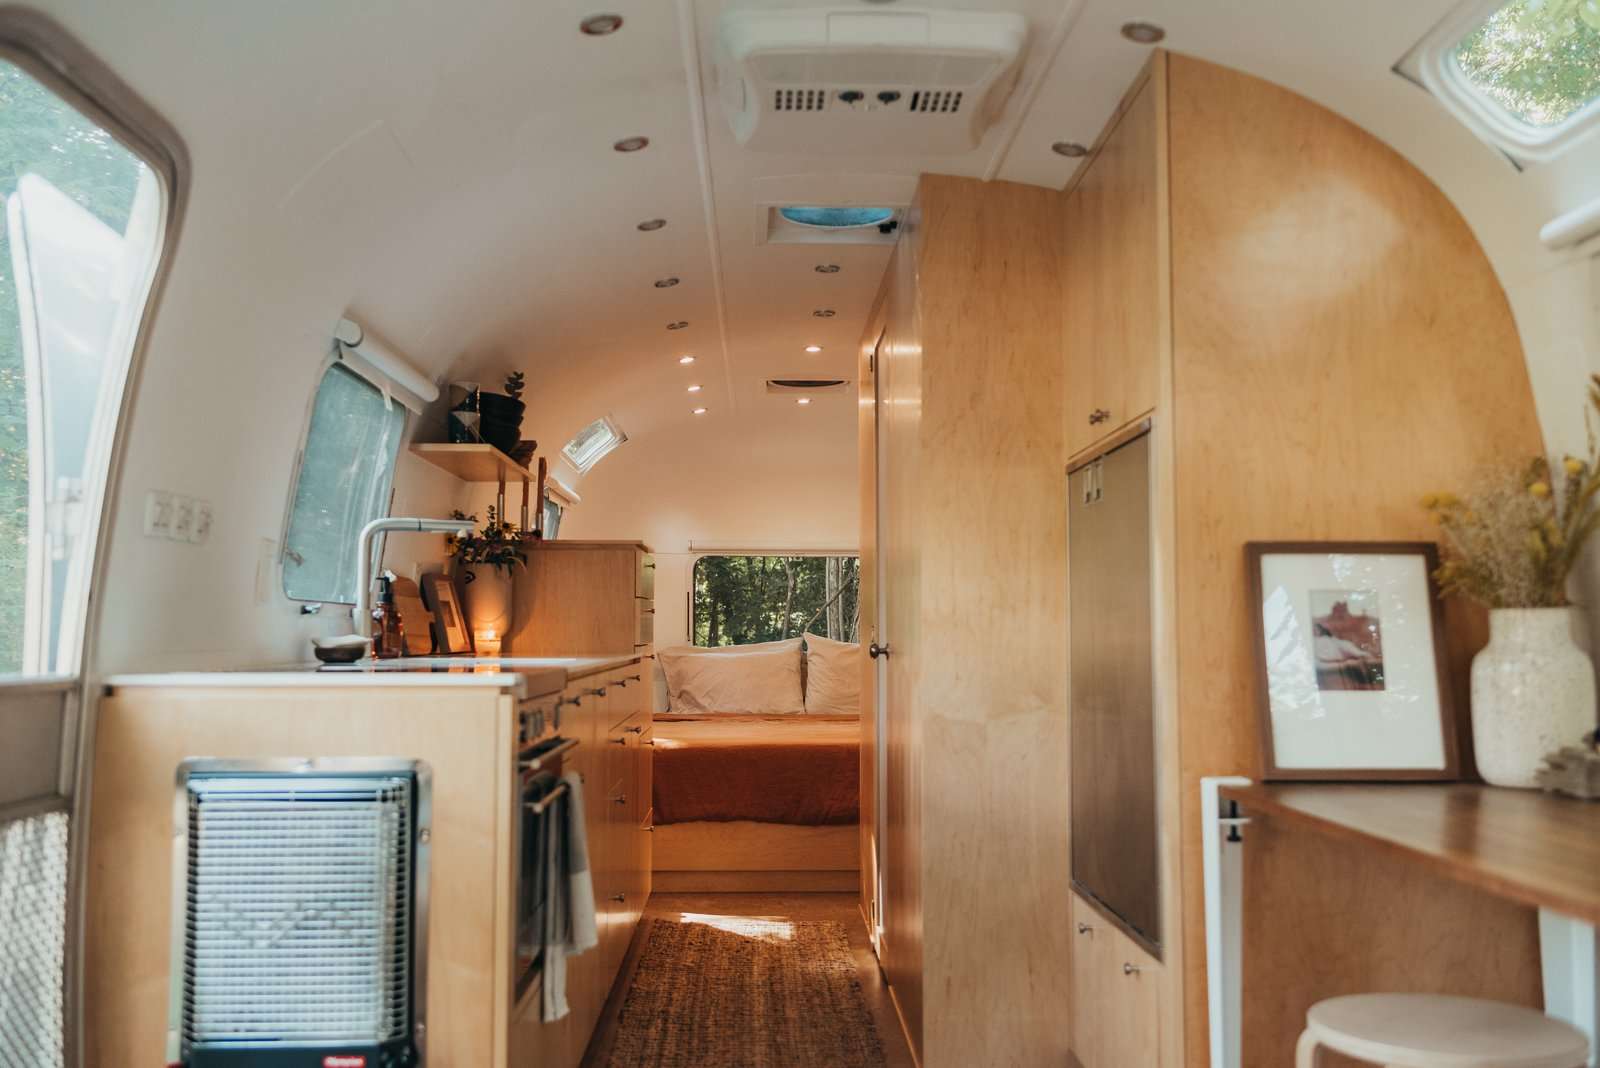 Grace and David opted for an open-concept layout, taking down interior walls and moving the bathroom from the back of the trailer to the center for optimal flow.